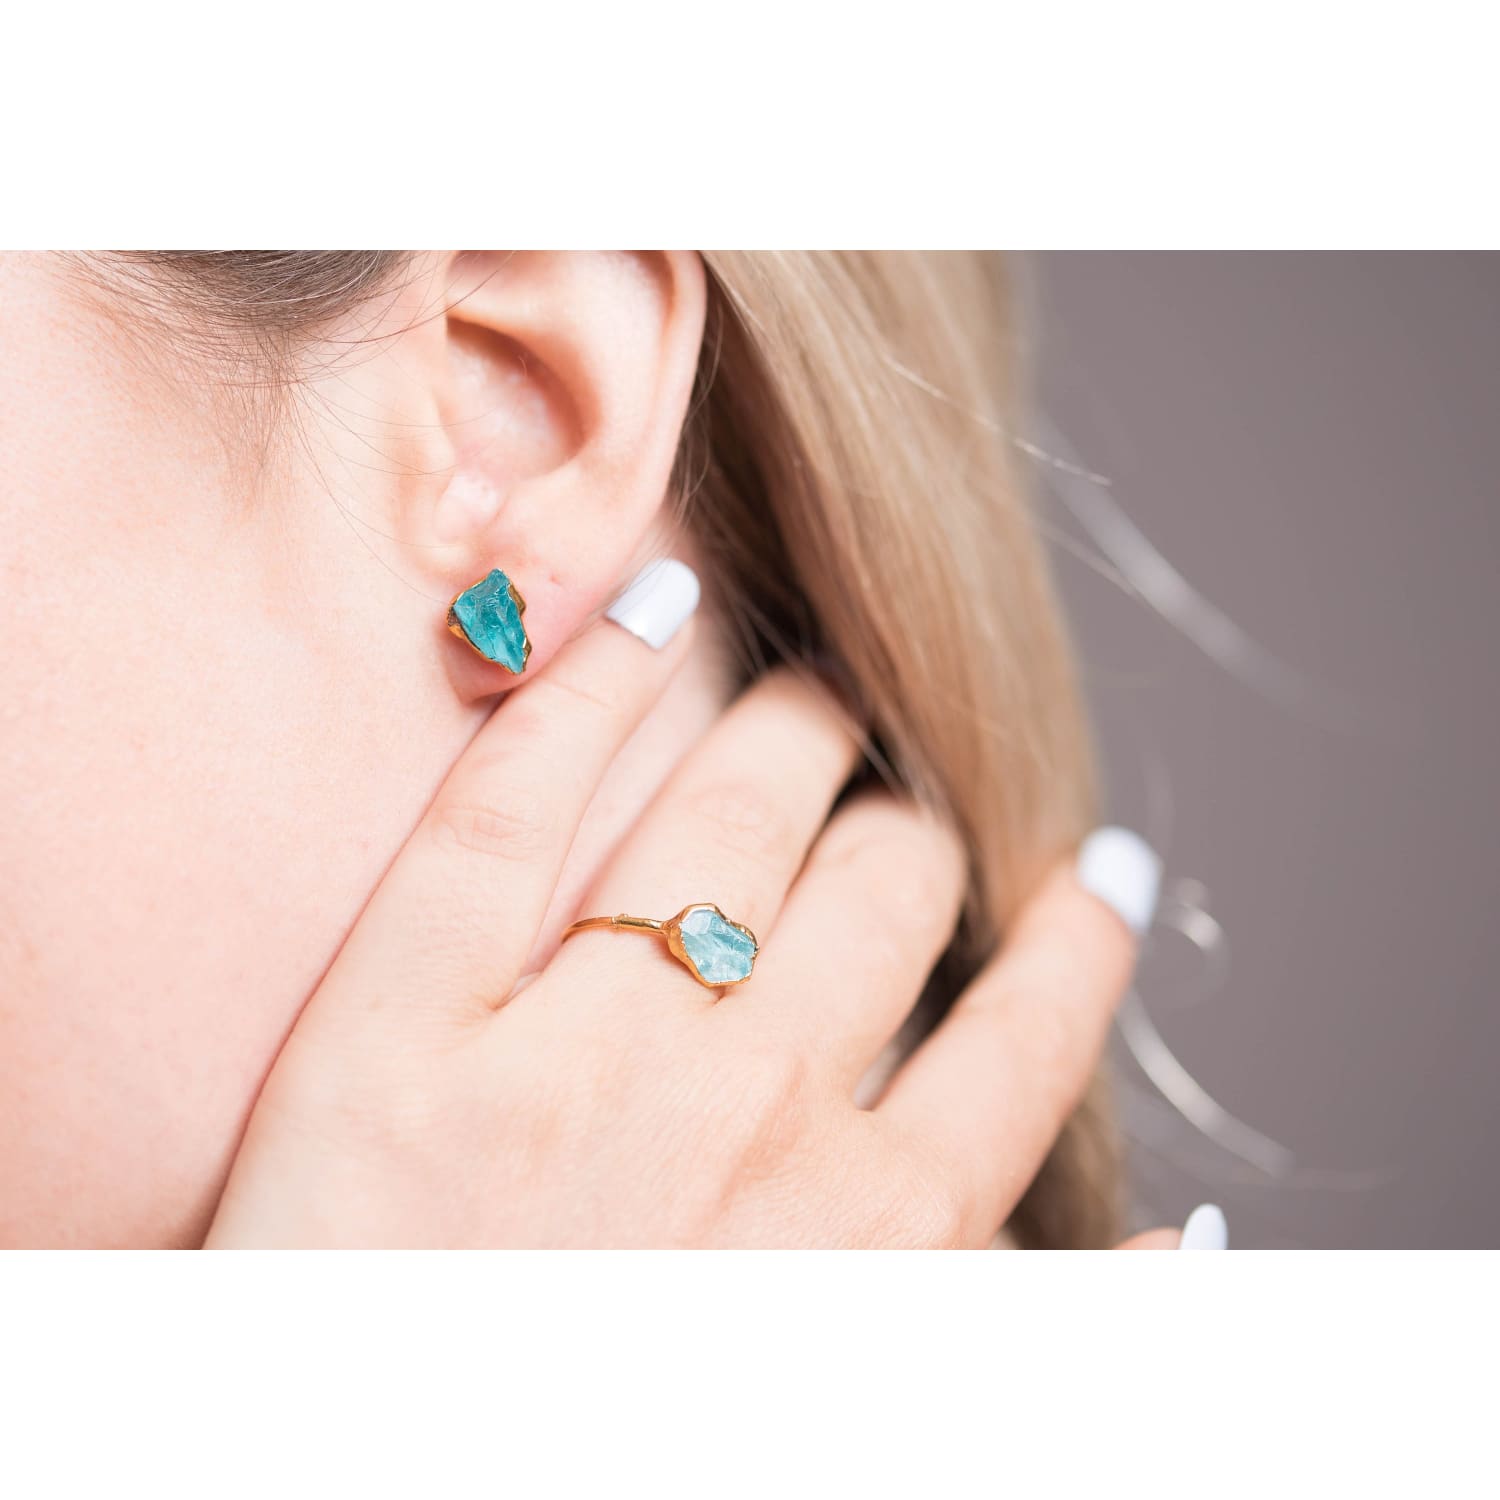 Raw Blue Apatite Ring in Rose Gold Petite Crystal Gold,